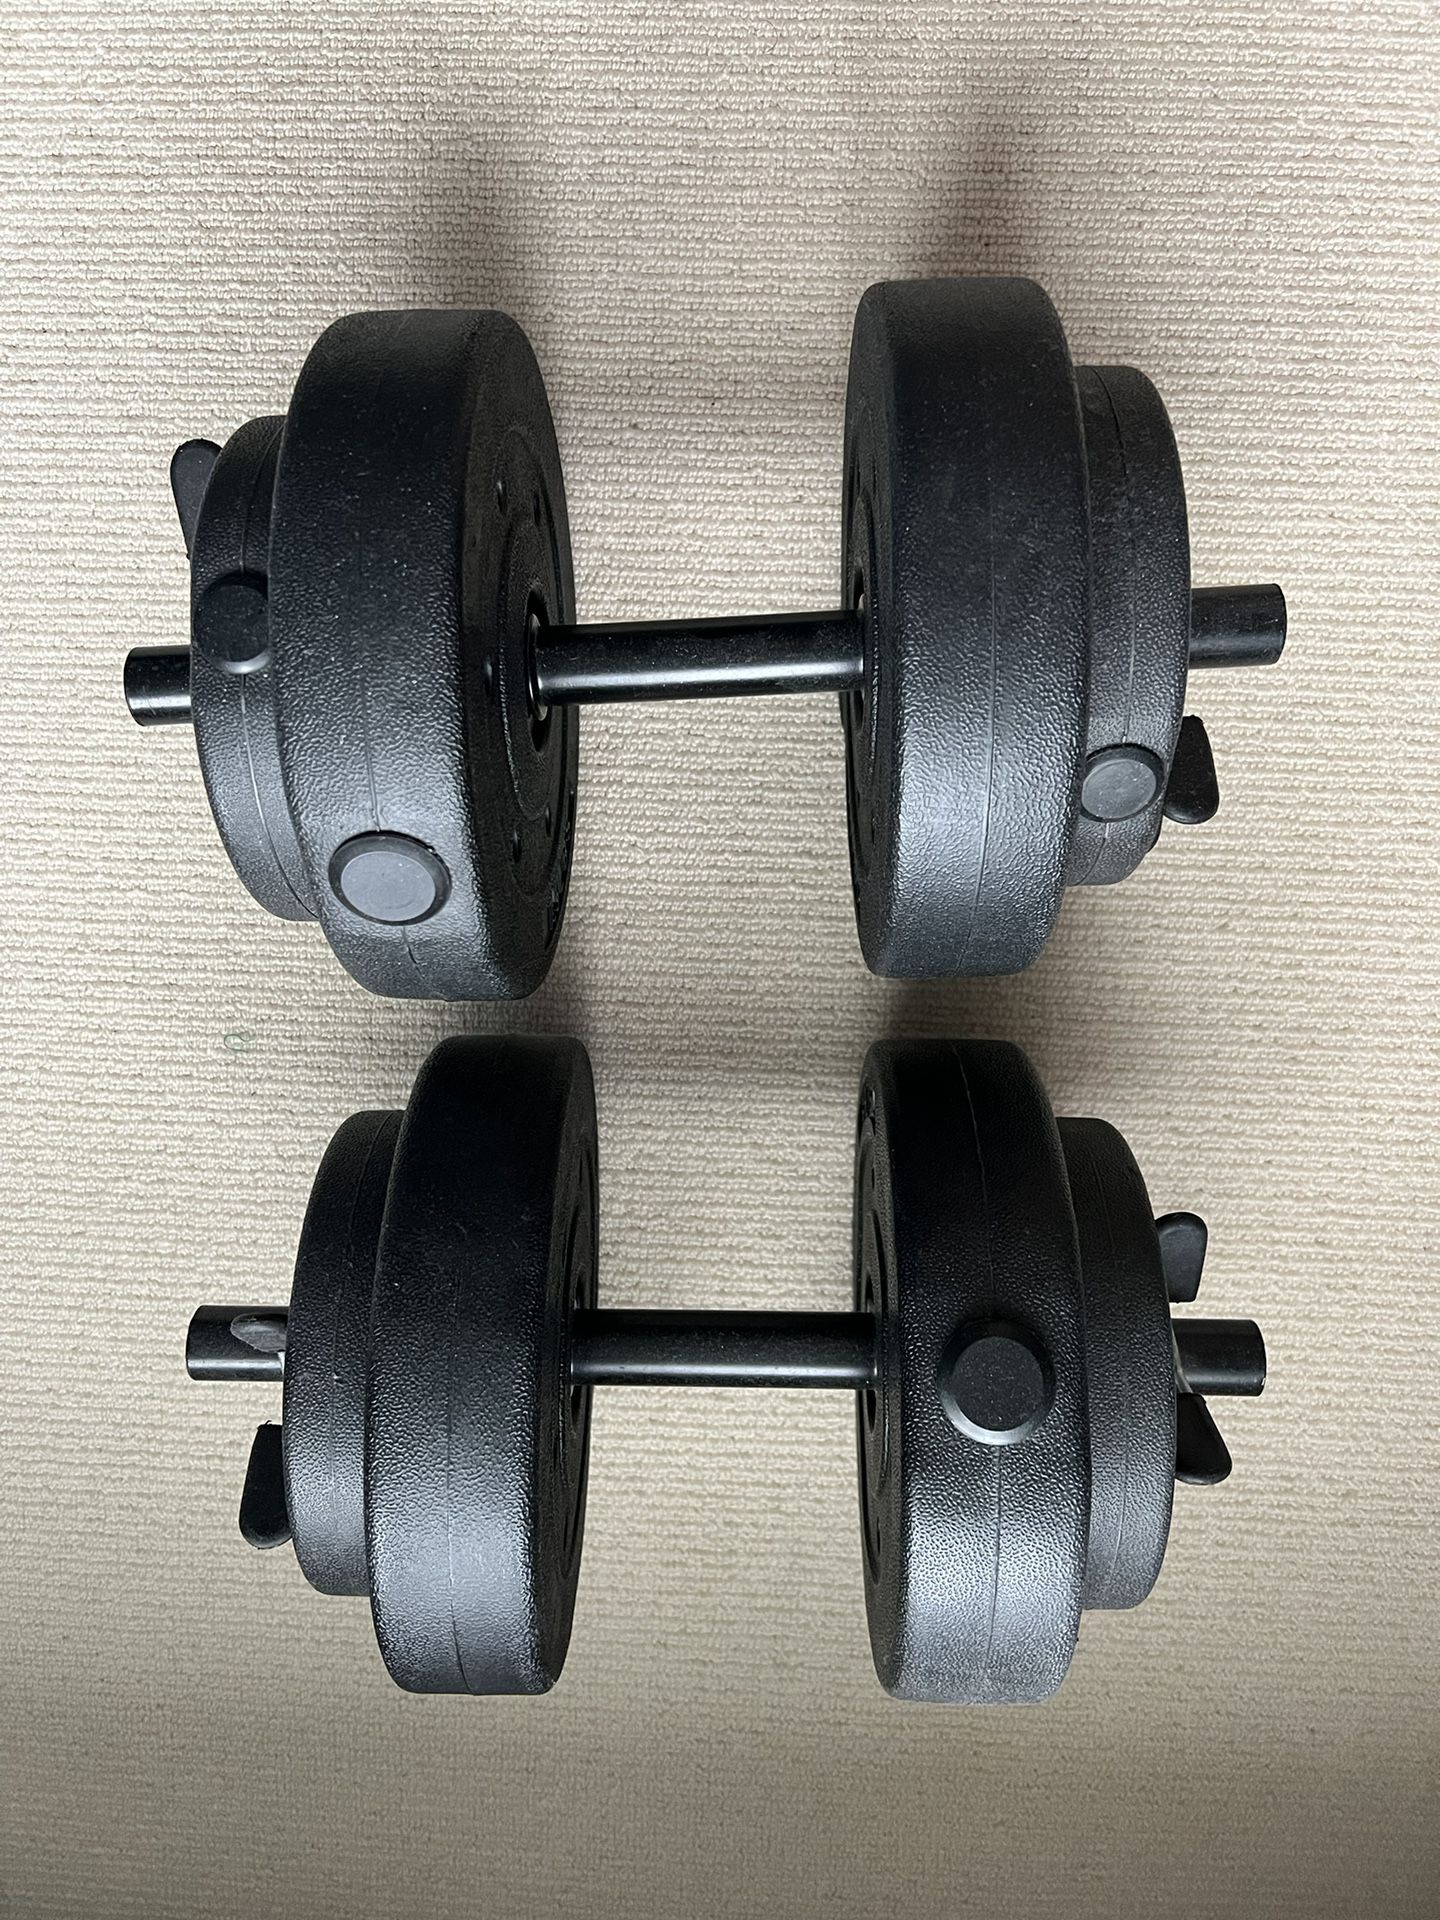 Dumbbells With Adjustable Weights